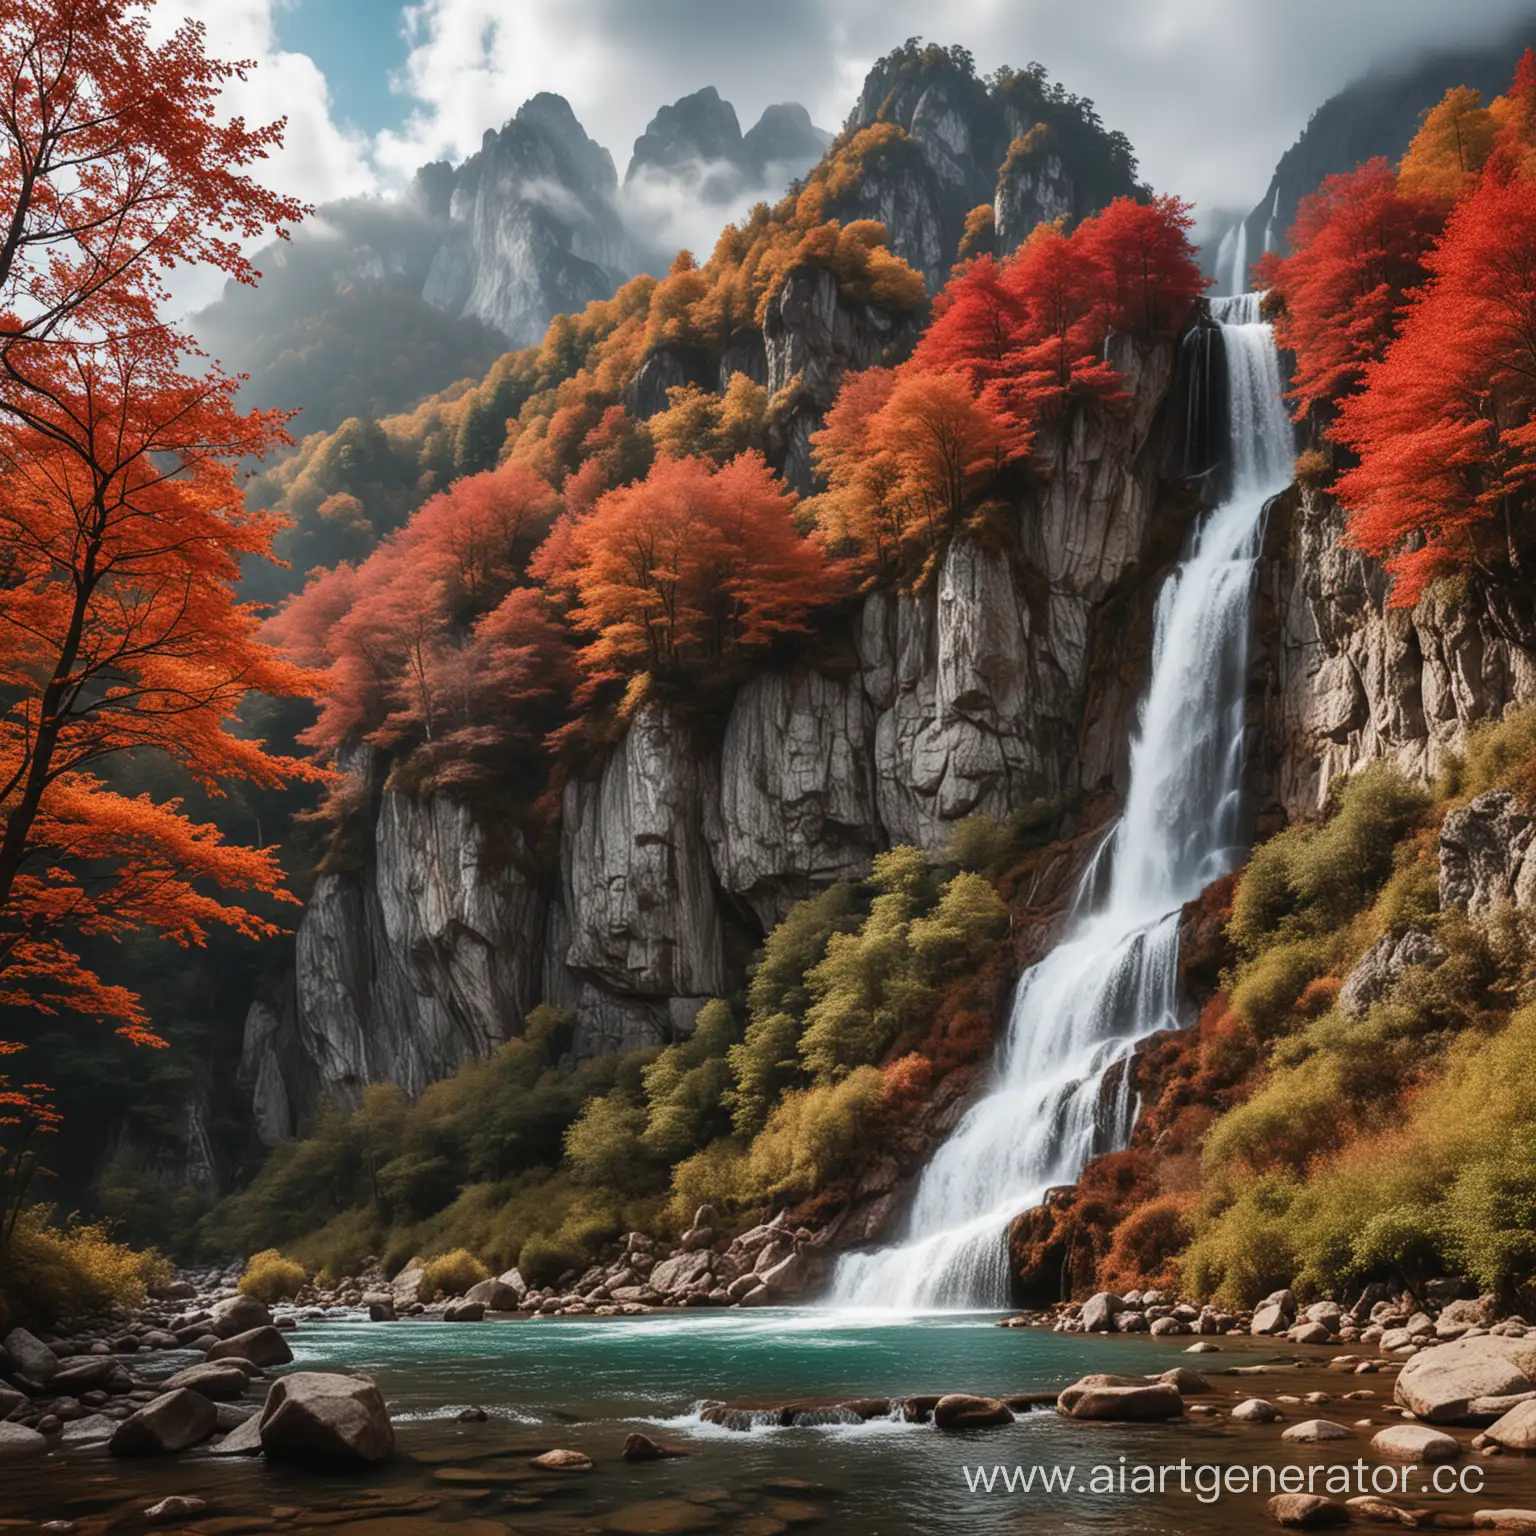 Spectacular-Mountain-Landscape-with-Lush-Red-Canopy-Trees-and-Cascading-Waterfall